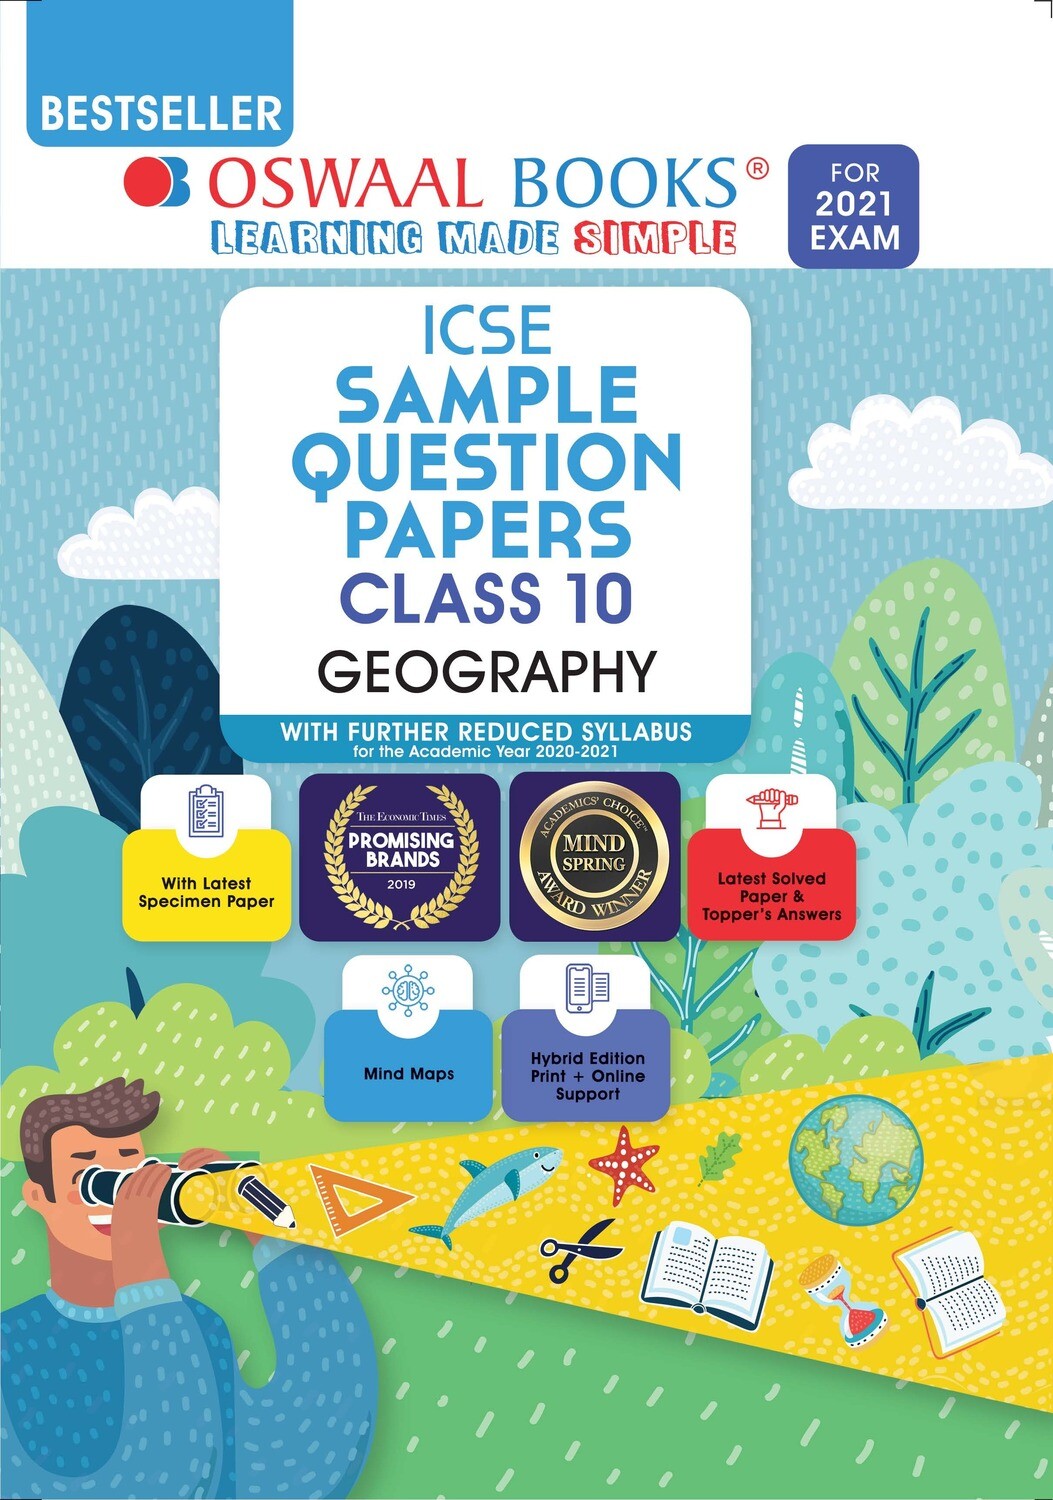 Buy e-book: Oswaal ICSE Sample Question Papers Class 10 Geography (Reduced Syllabus for 2021 Exam)